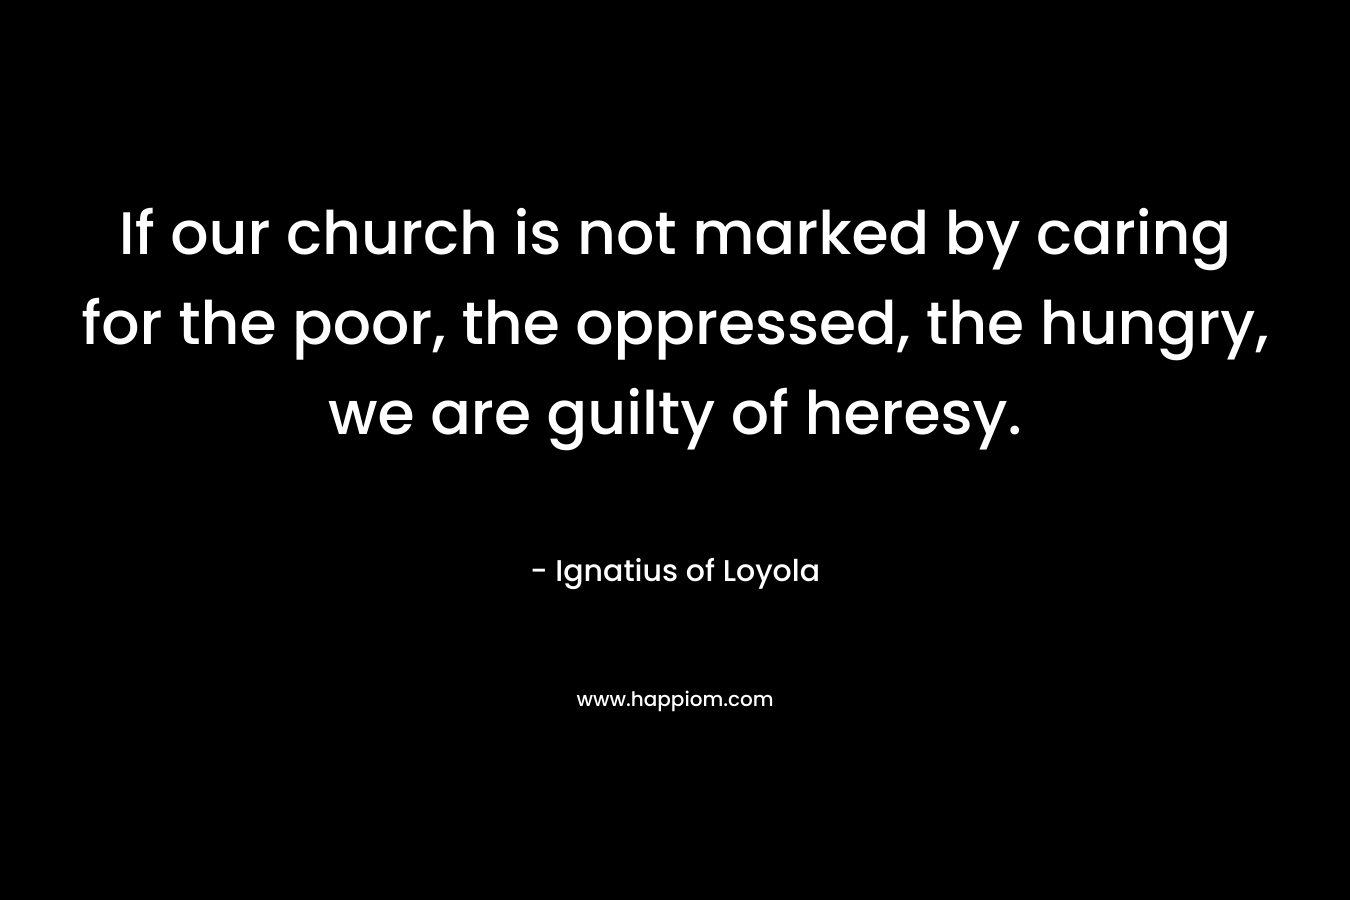 If our church is not marked by caring for the poor, the oppressed, the hungry, we are guilty of heresy.